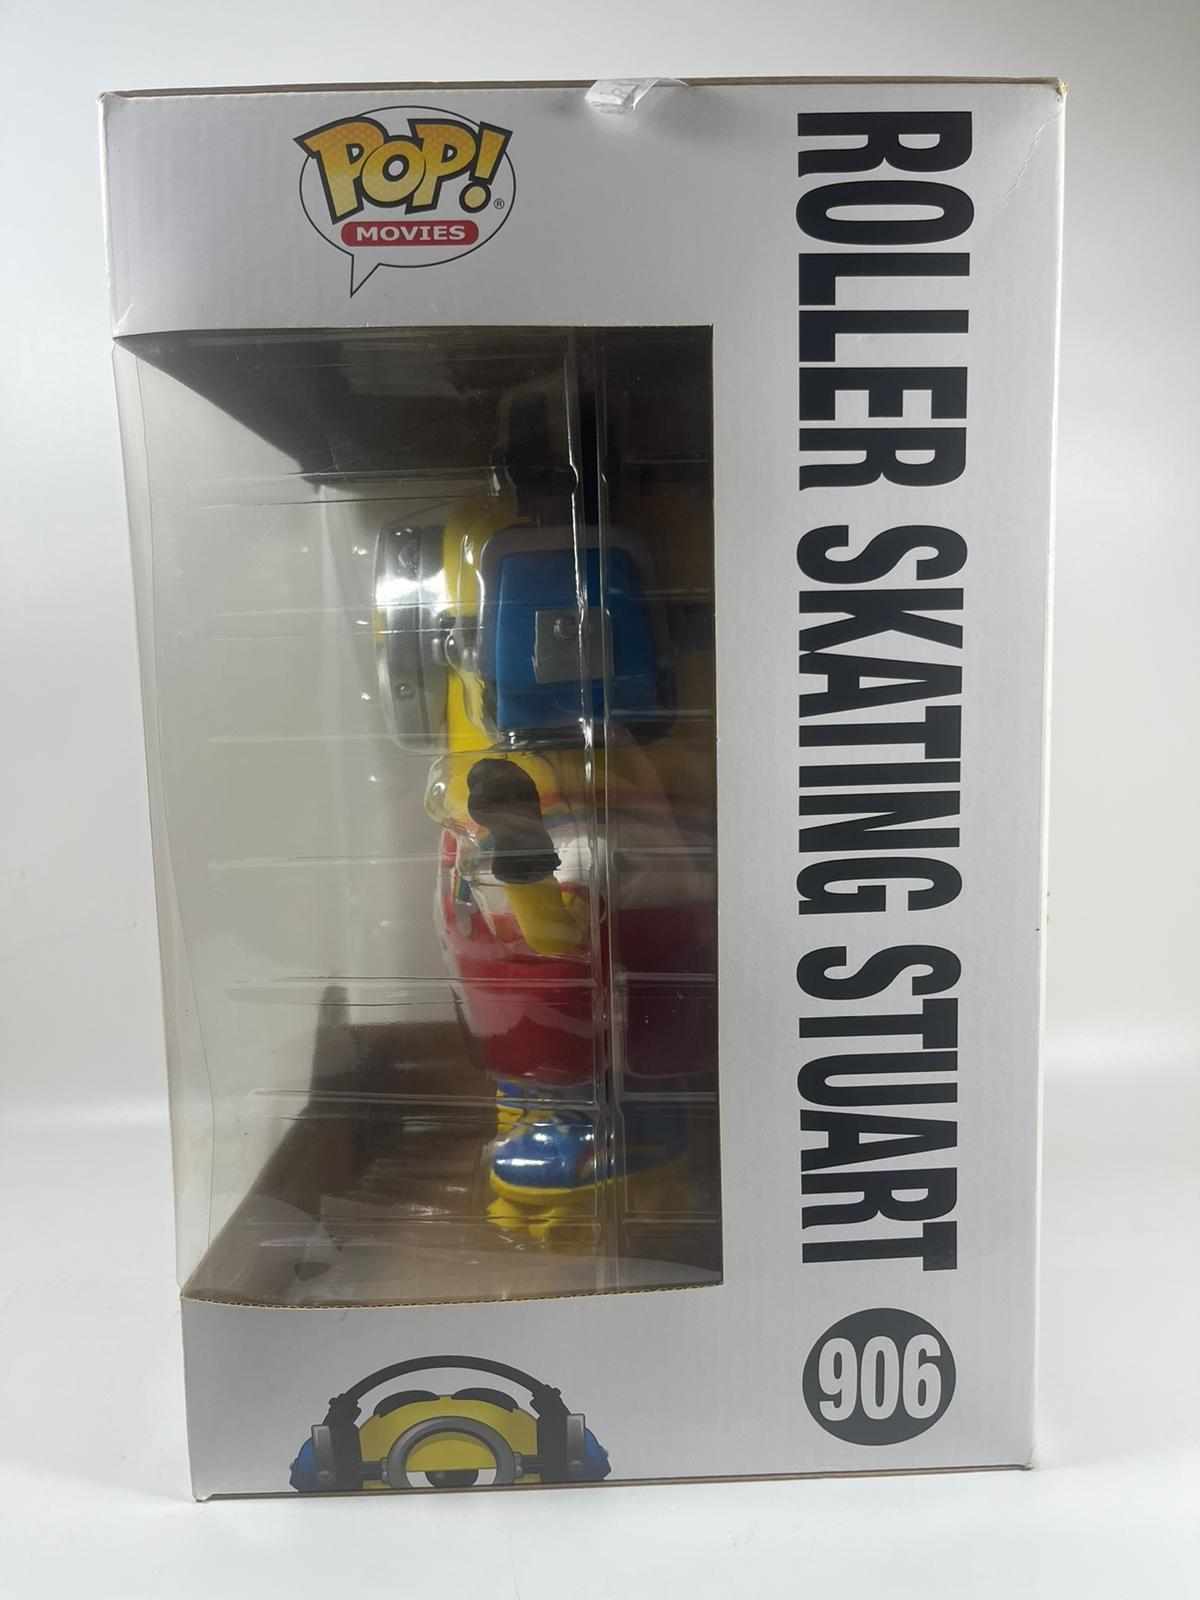 A LARGE FUNKO POP MOVIES 10" 906 MINIONS THE RISE OF GRU ROLLER SKATING STUART VINYL BOXED FIGURE - Image 4 of 5